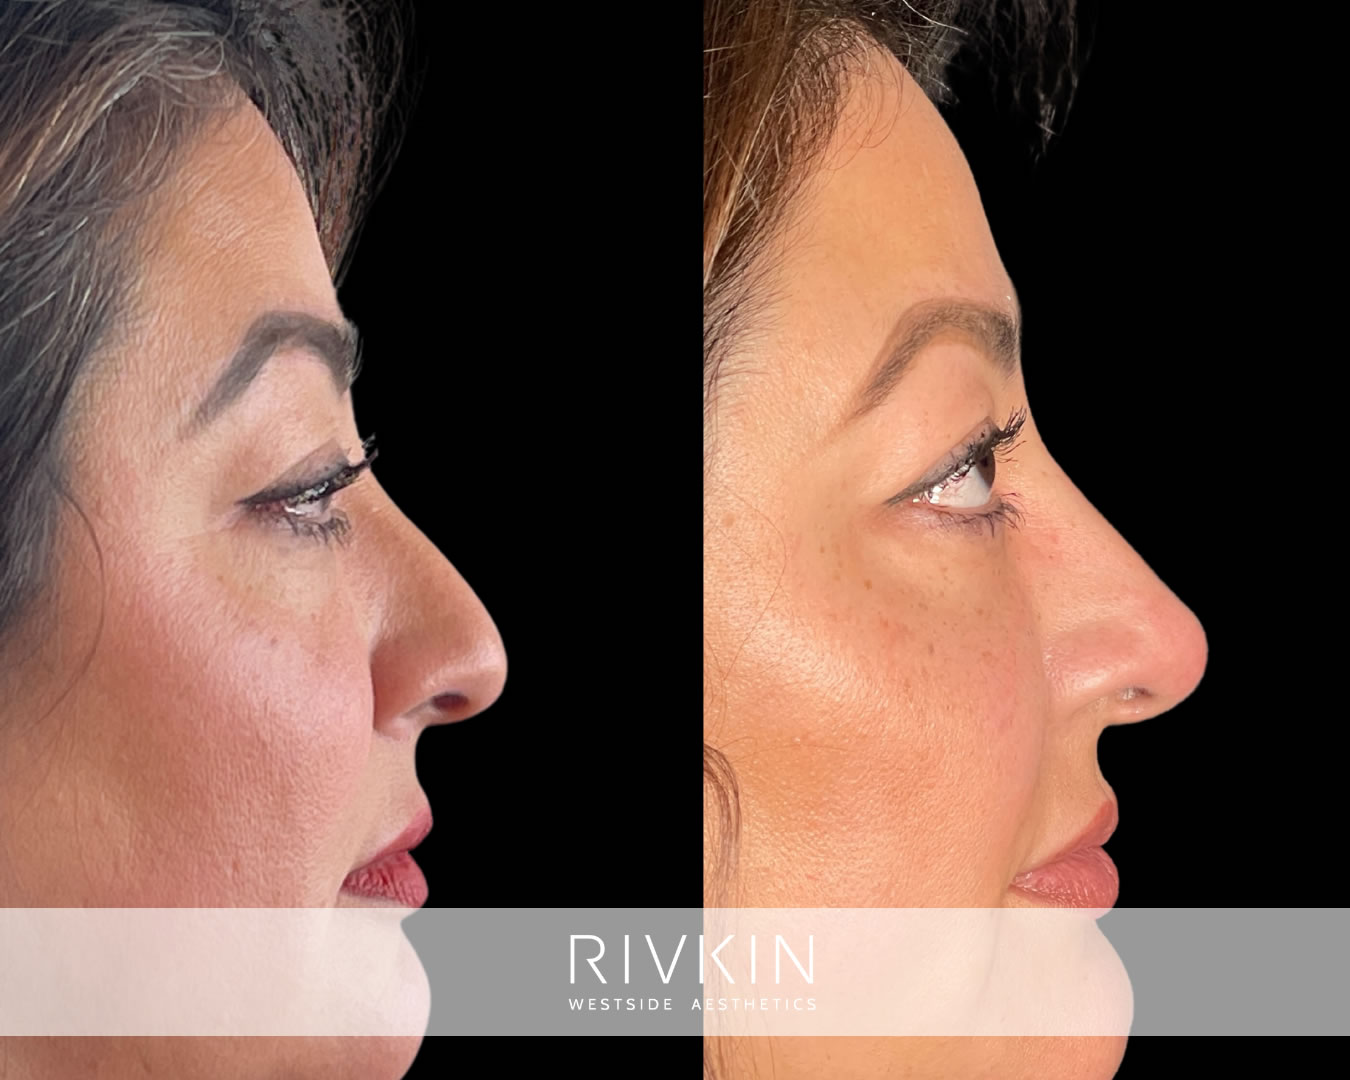 This patient’s droopy nasal tip was elevated solely with Restylane Lyft filler injections. The visible transformation is most noticeable in the profile photo, but the tip projection also appears different from the front view.